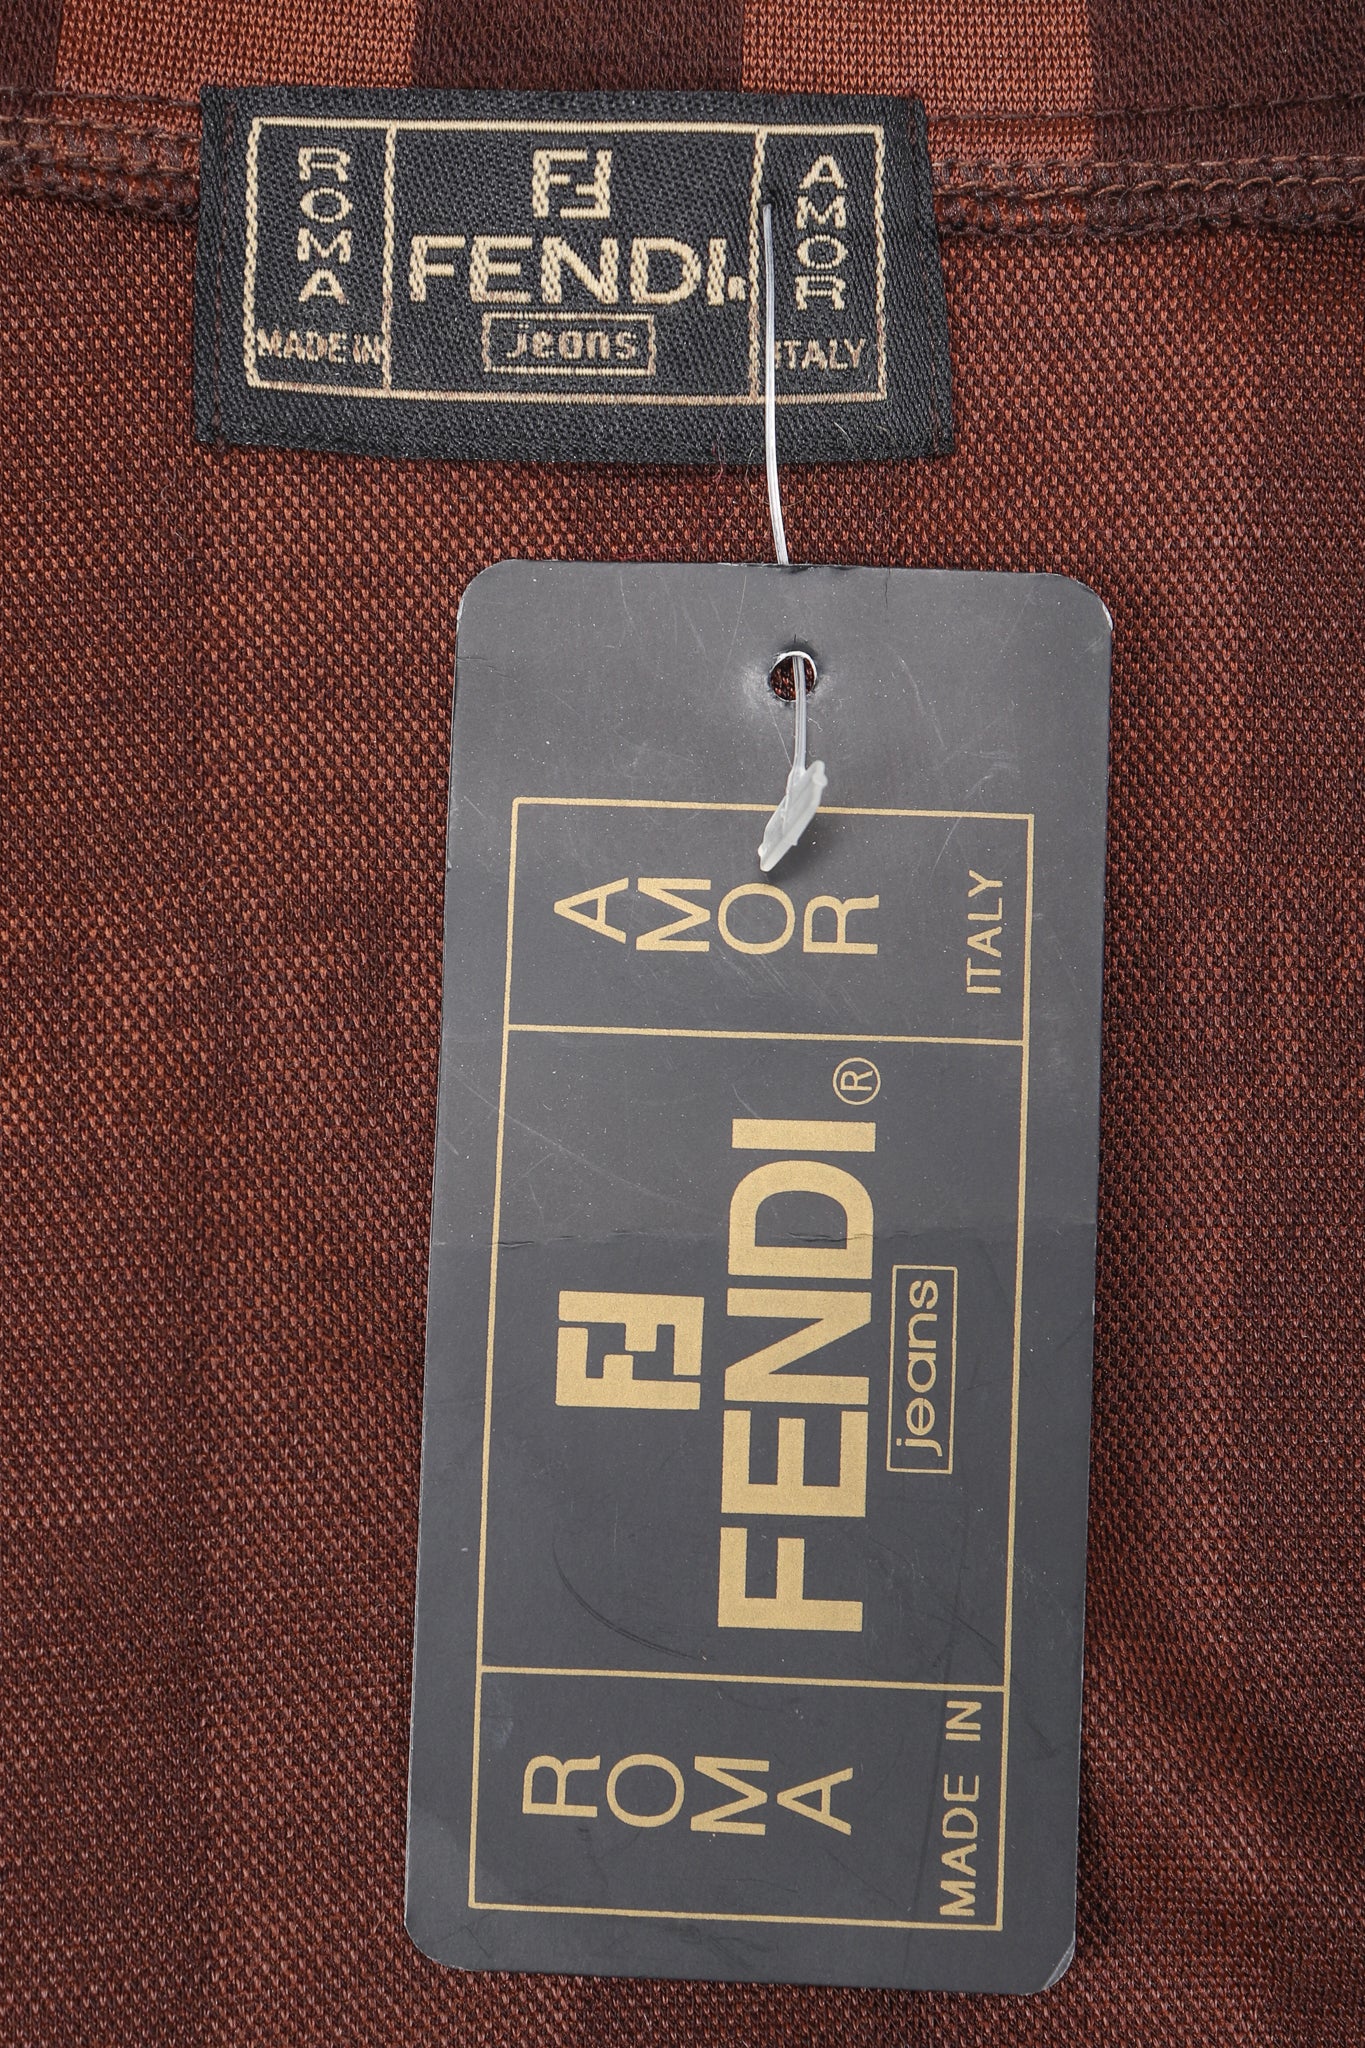 Recess Vintage Fendi Label and tag on Brown Knit fabric